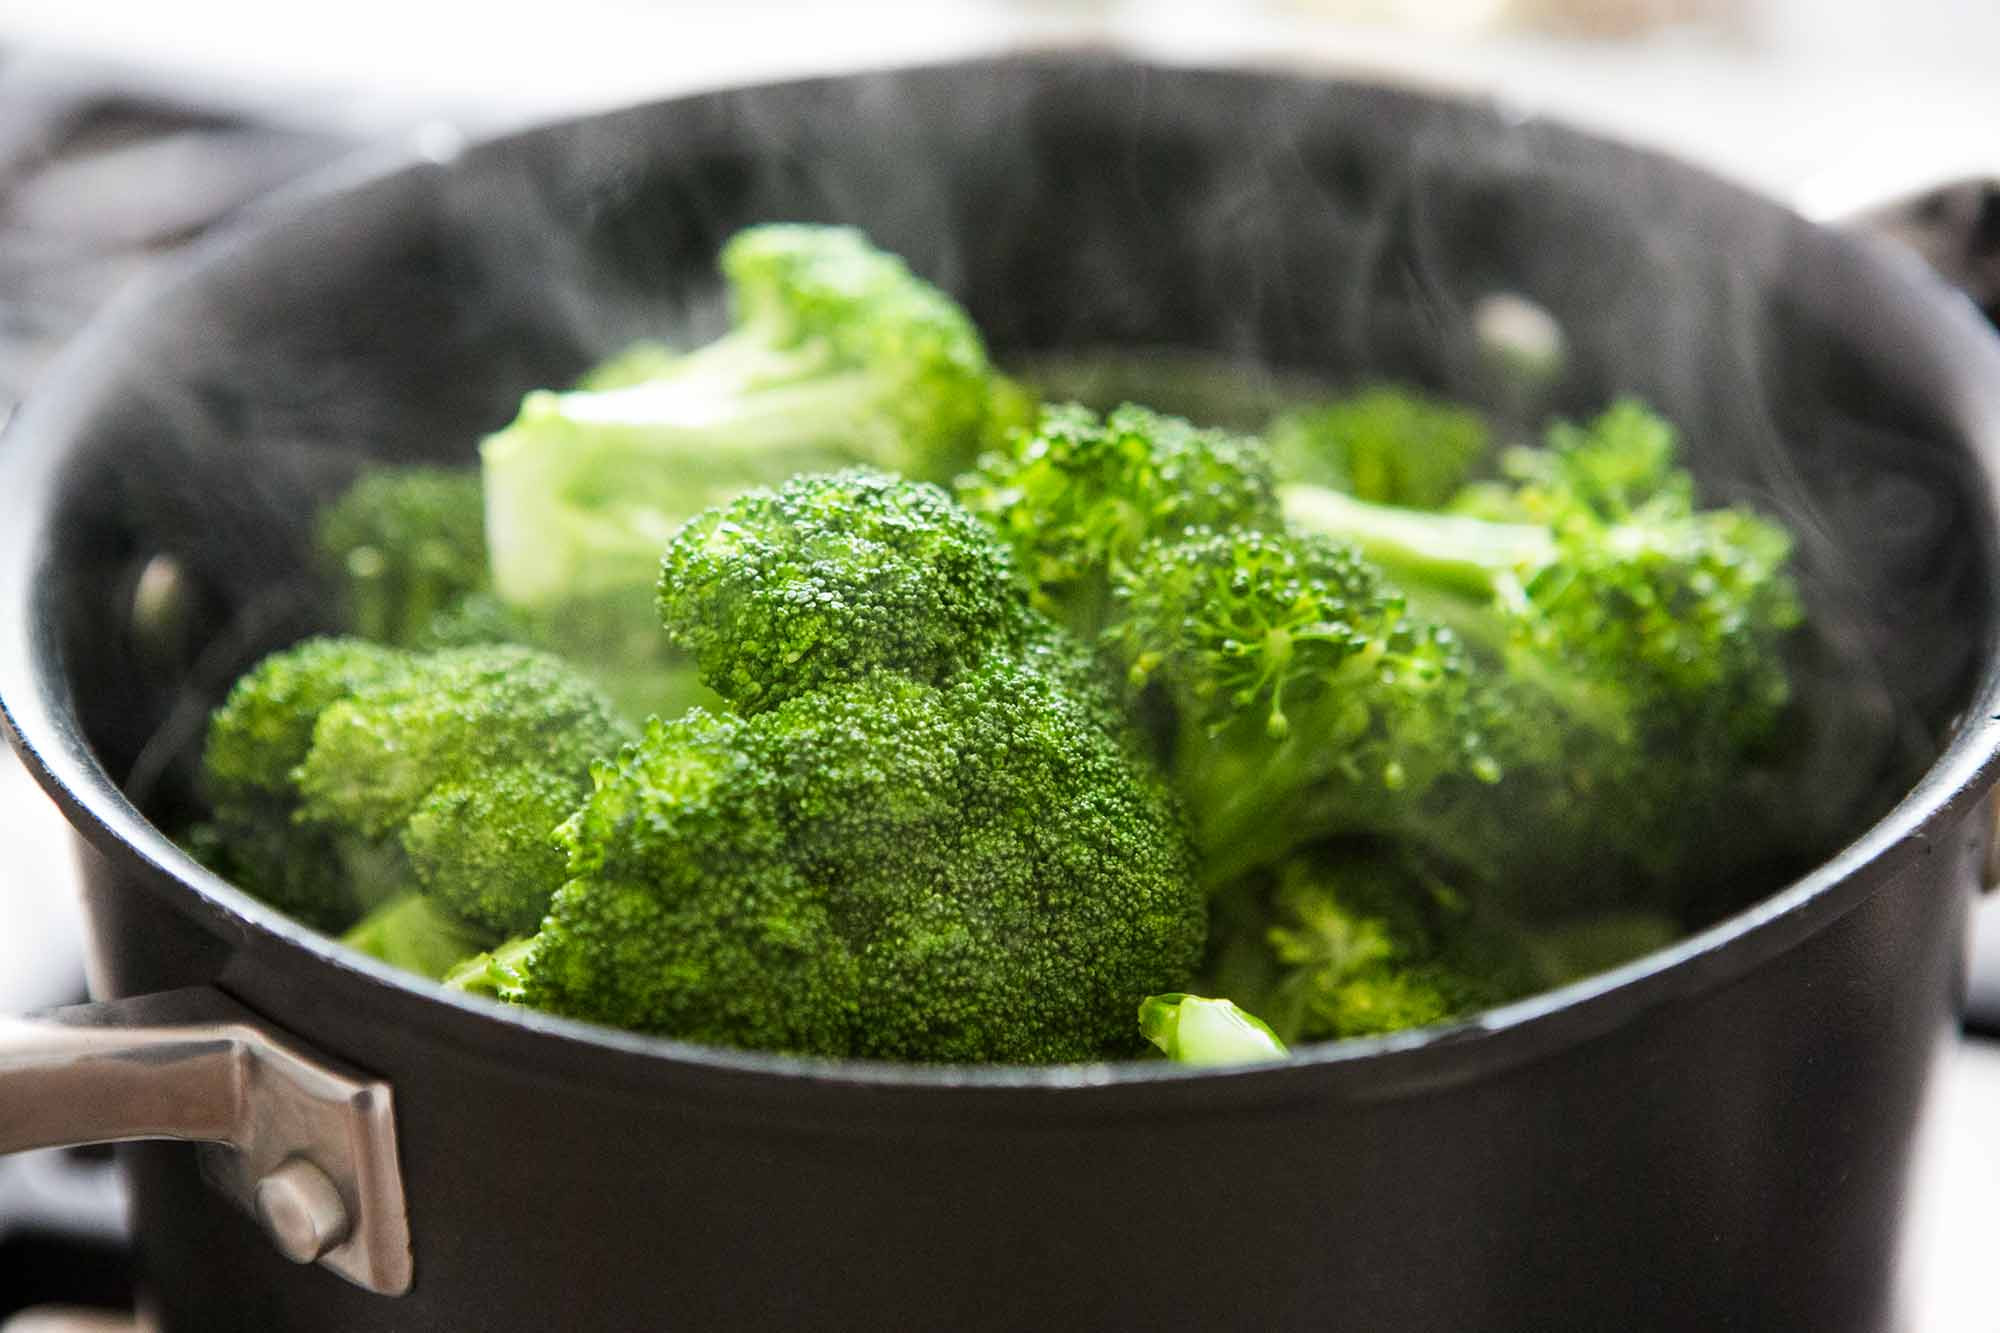 Broccoli In Microwave
 How to Steam Broccoli Perfectly Every Time